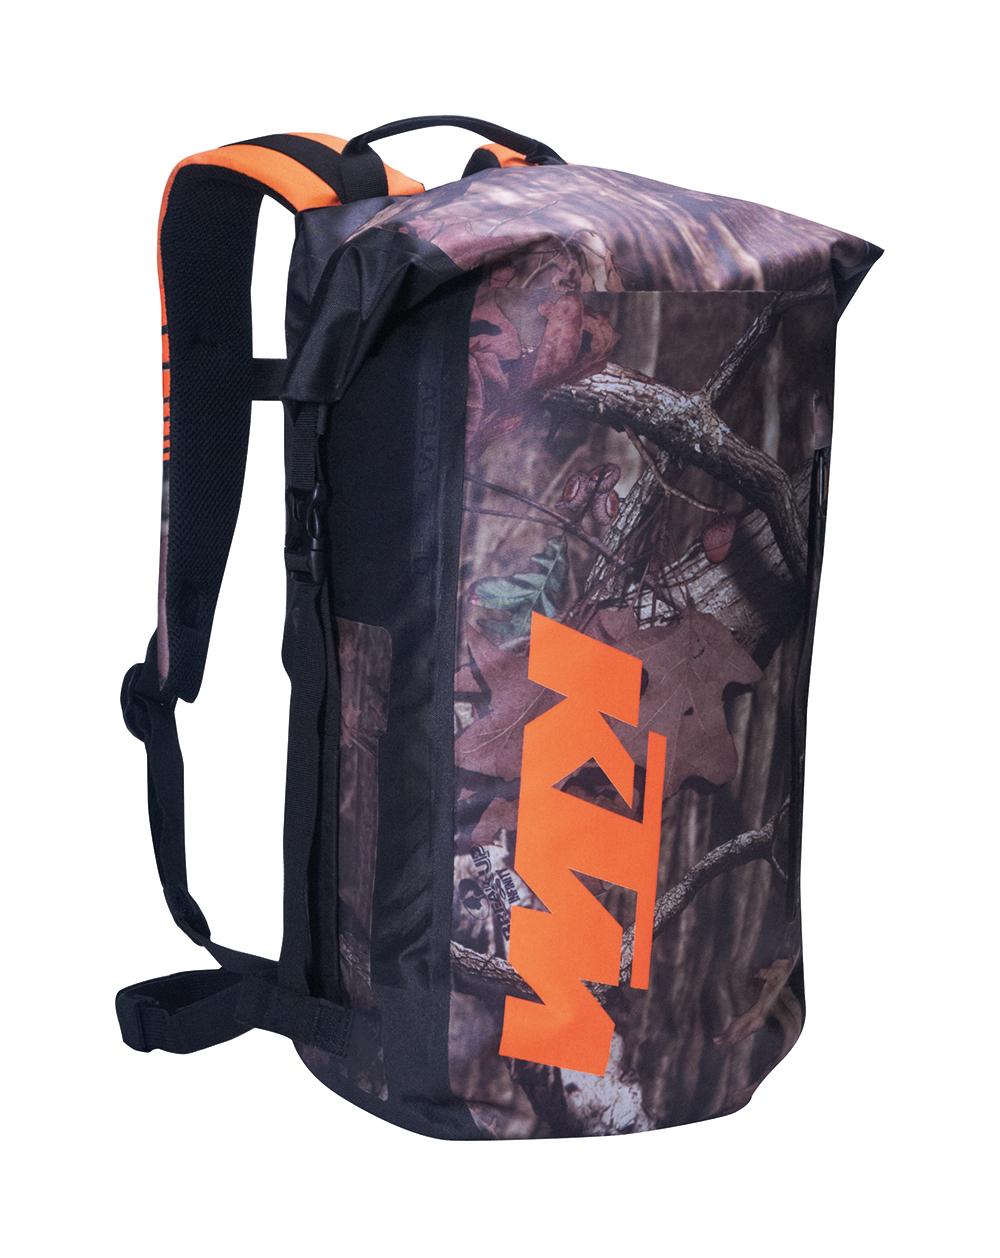 Main image of KTM All Elements Mossy Oak Pack by Ogio